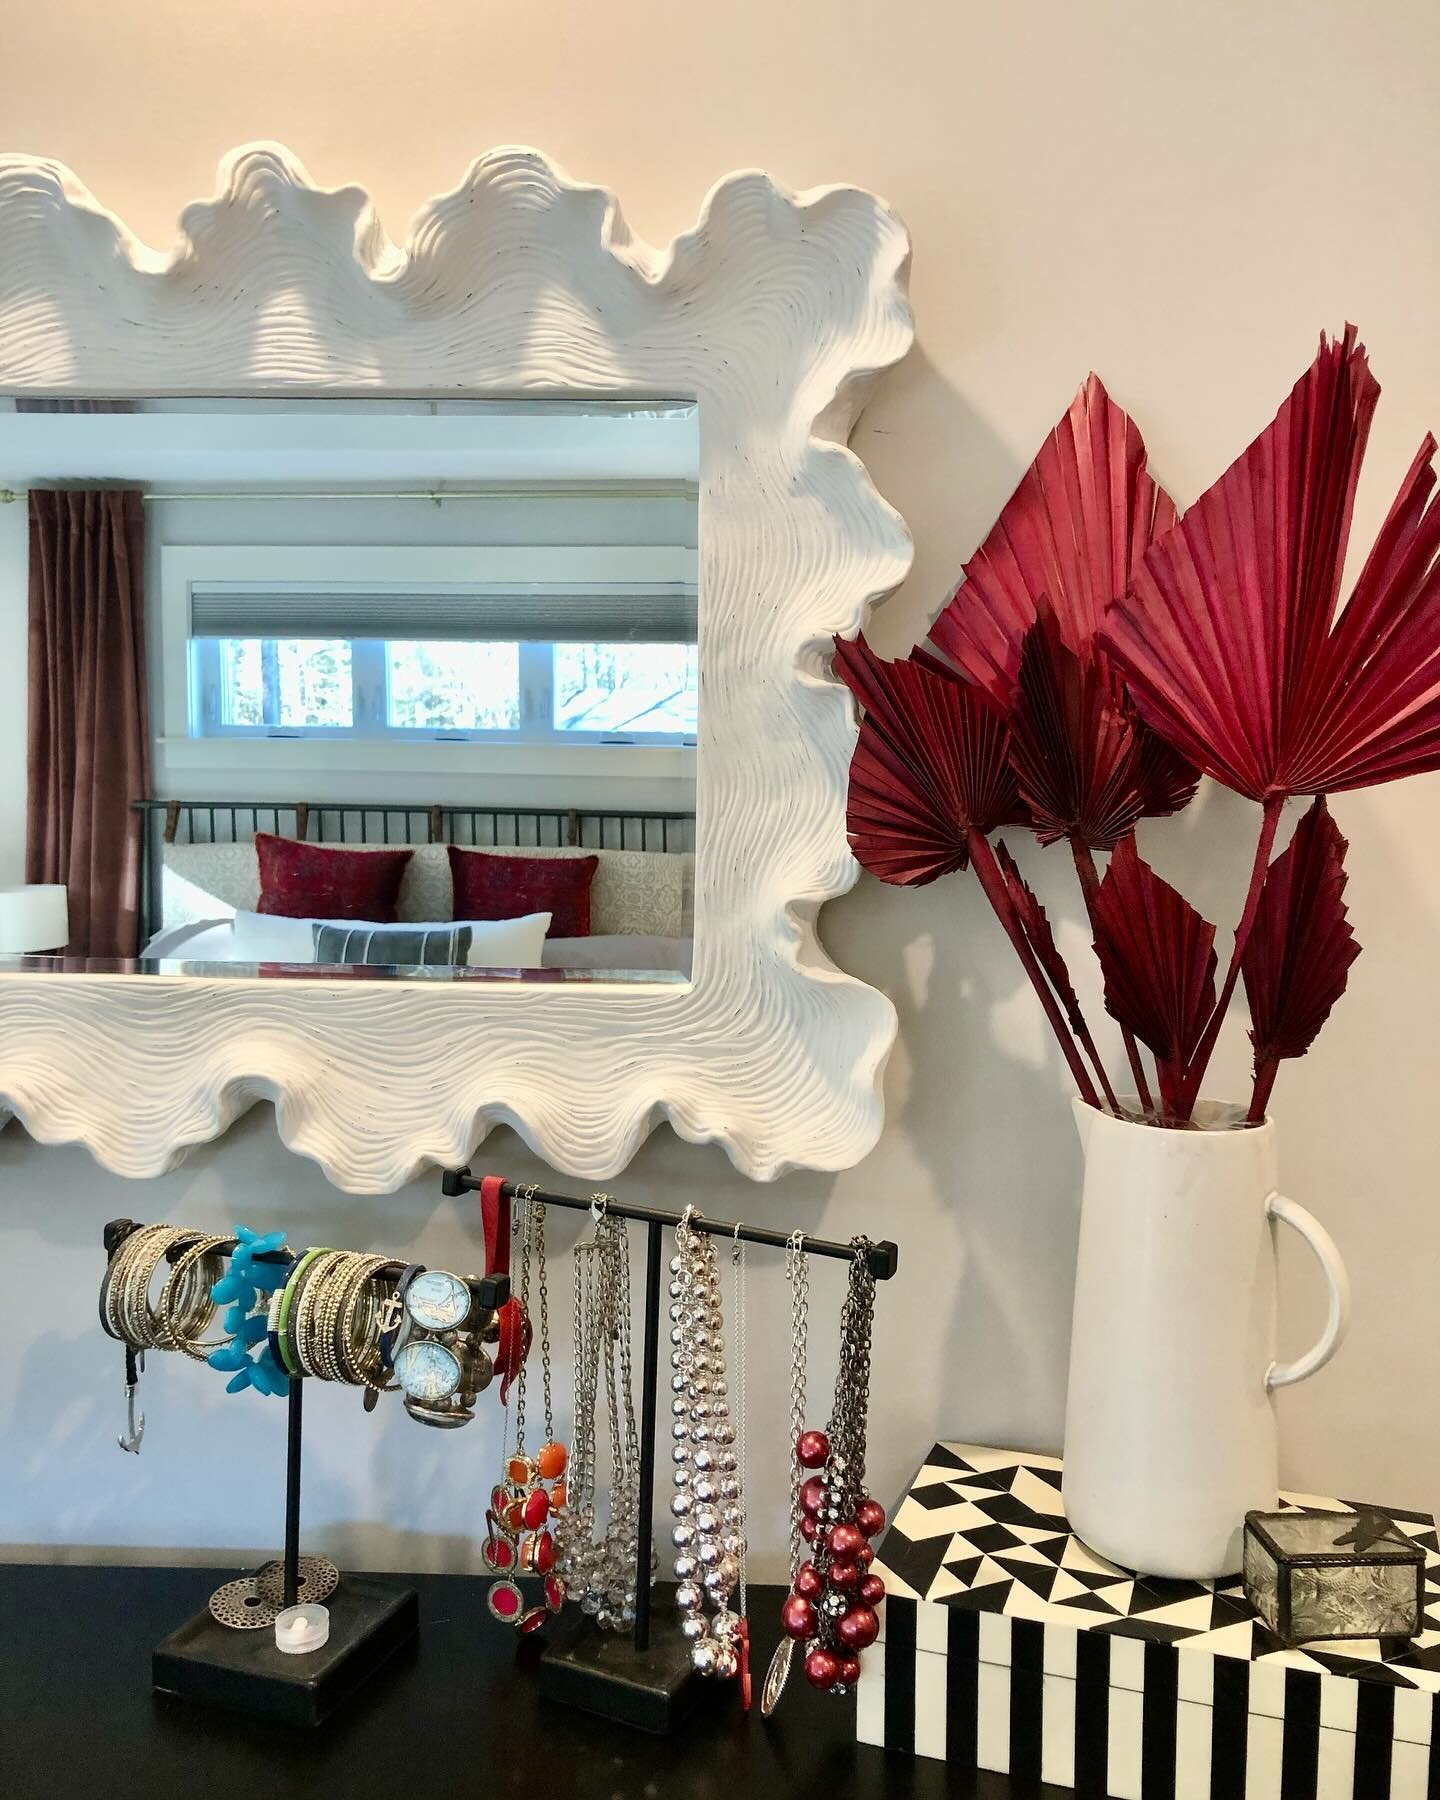 And simply because I am a girl who loves texture and pops of red&hellip; this is a lovely last look spot when headed out. 

#ballarddesigns #mirrorenvy #redpalm #interiorstyling #makeitworkforyourclient #jewelryspot